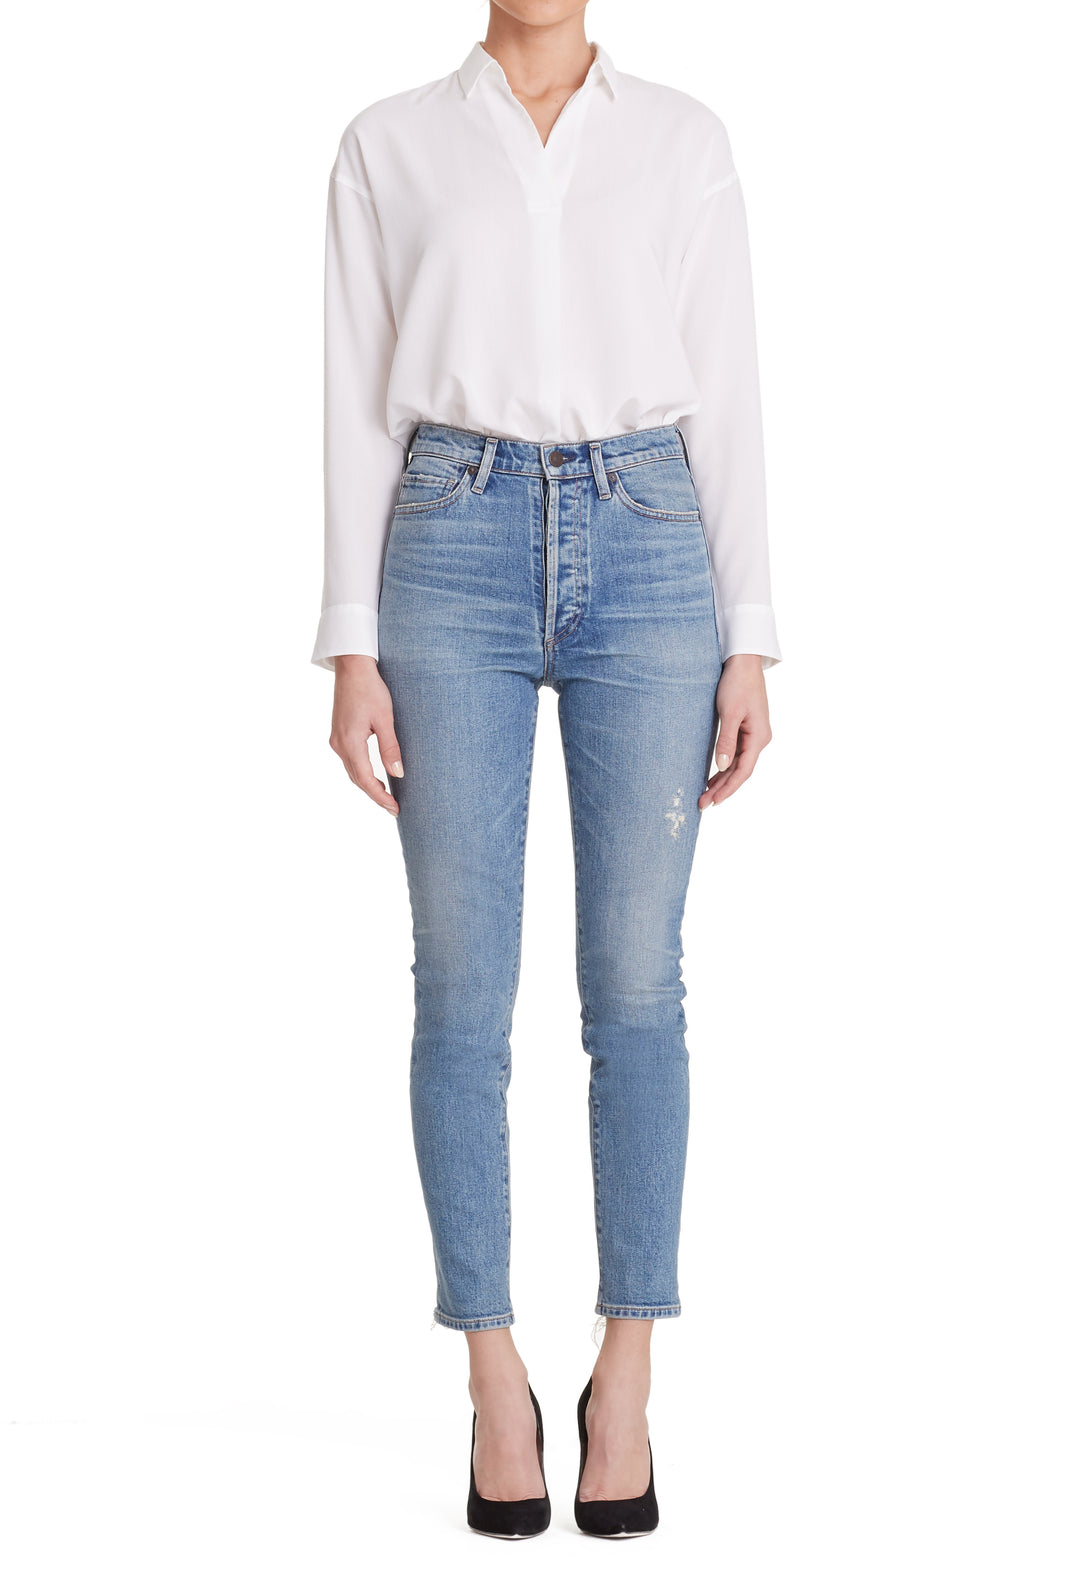 Citizens of Humanity - Olivia High Rise Slim Ankle Jeans in Backroad